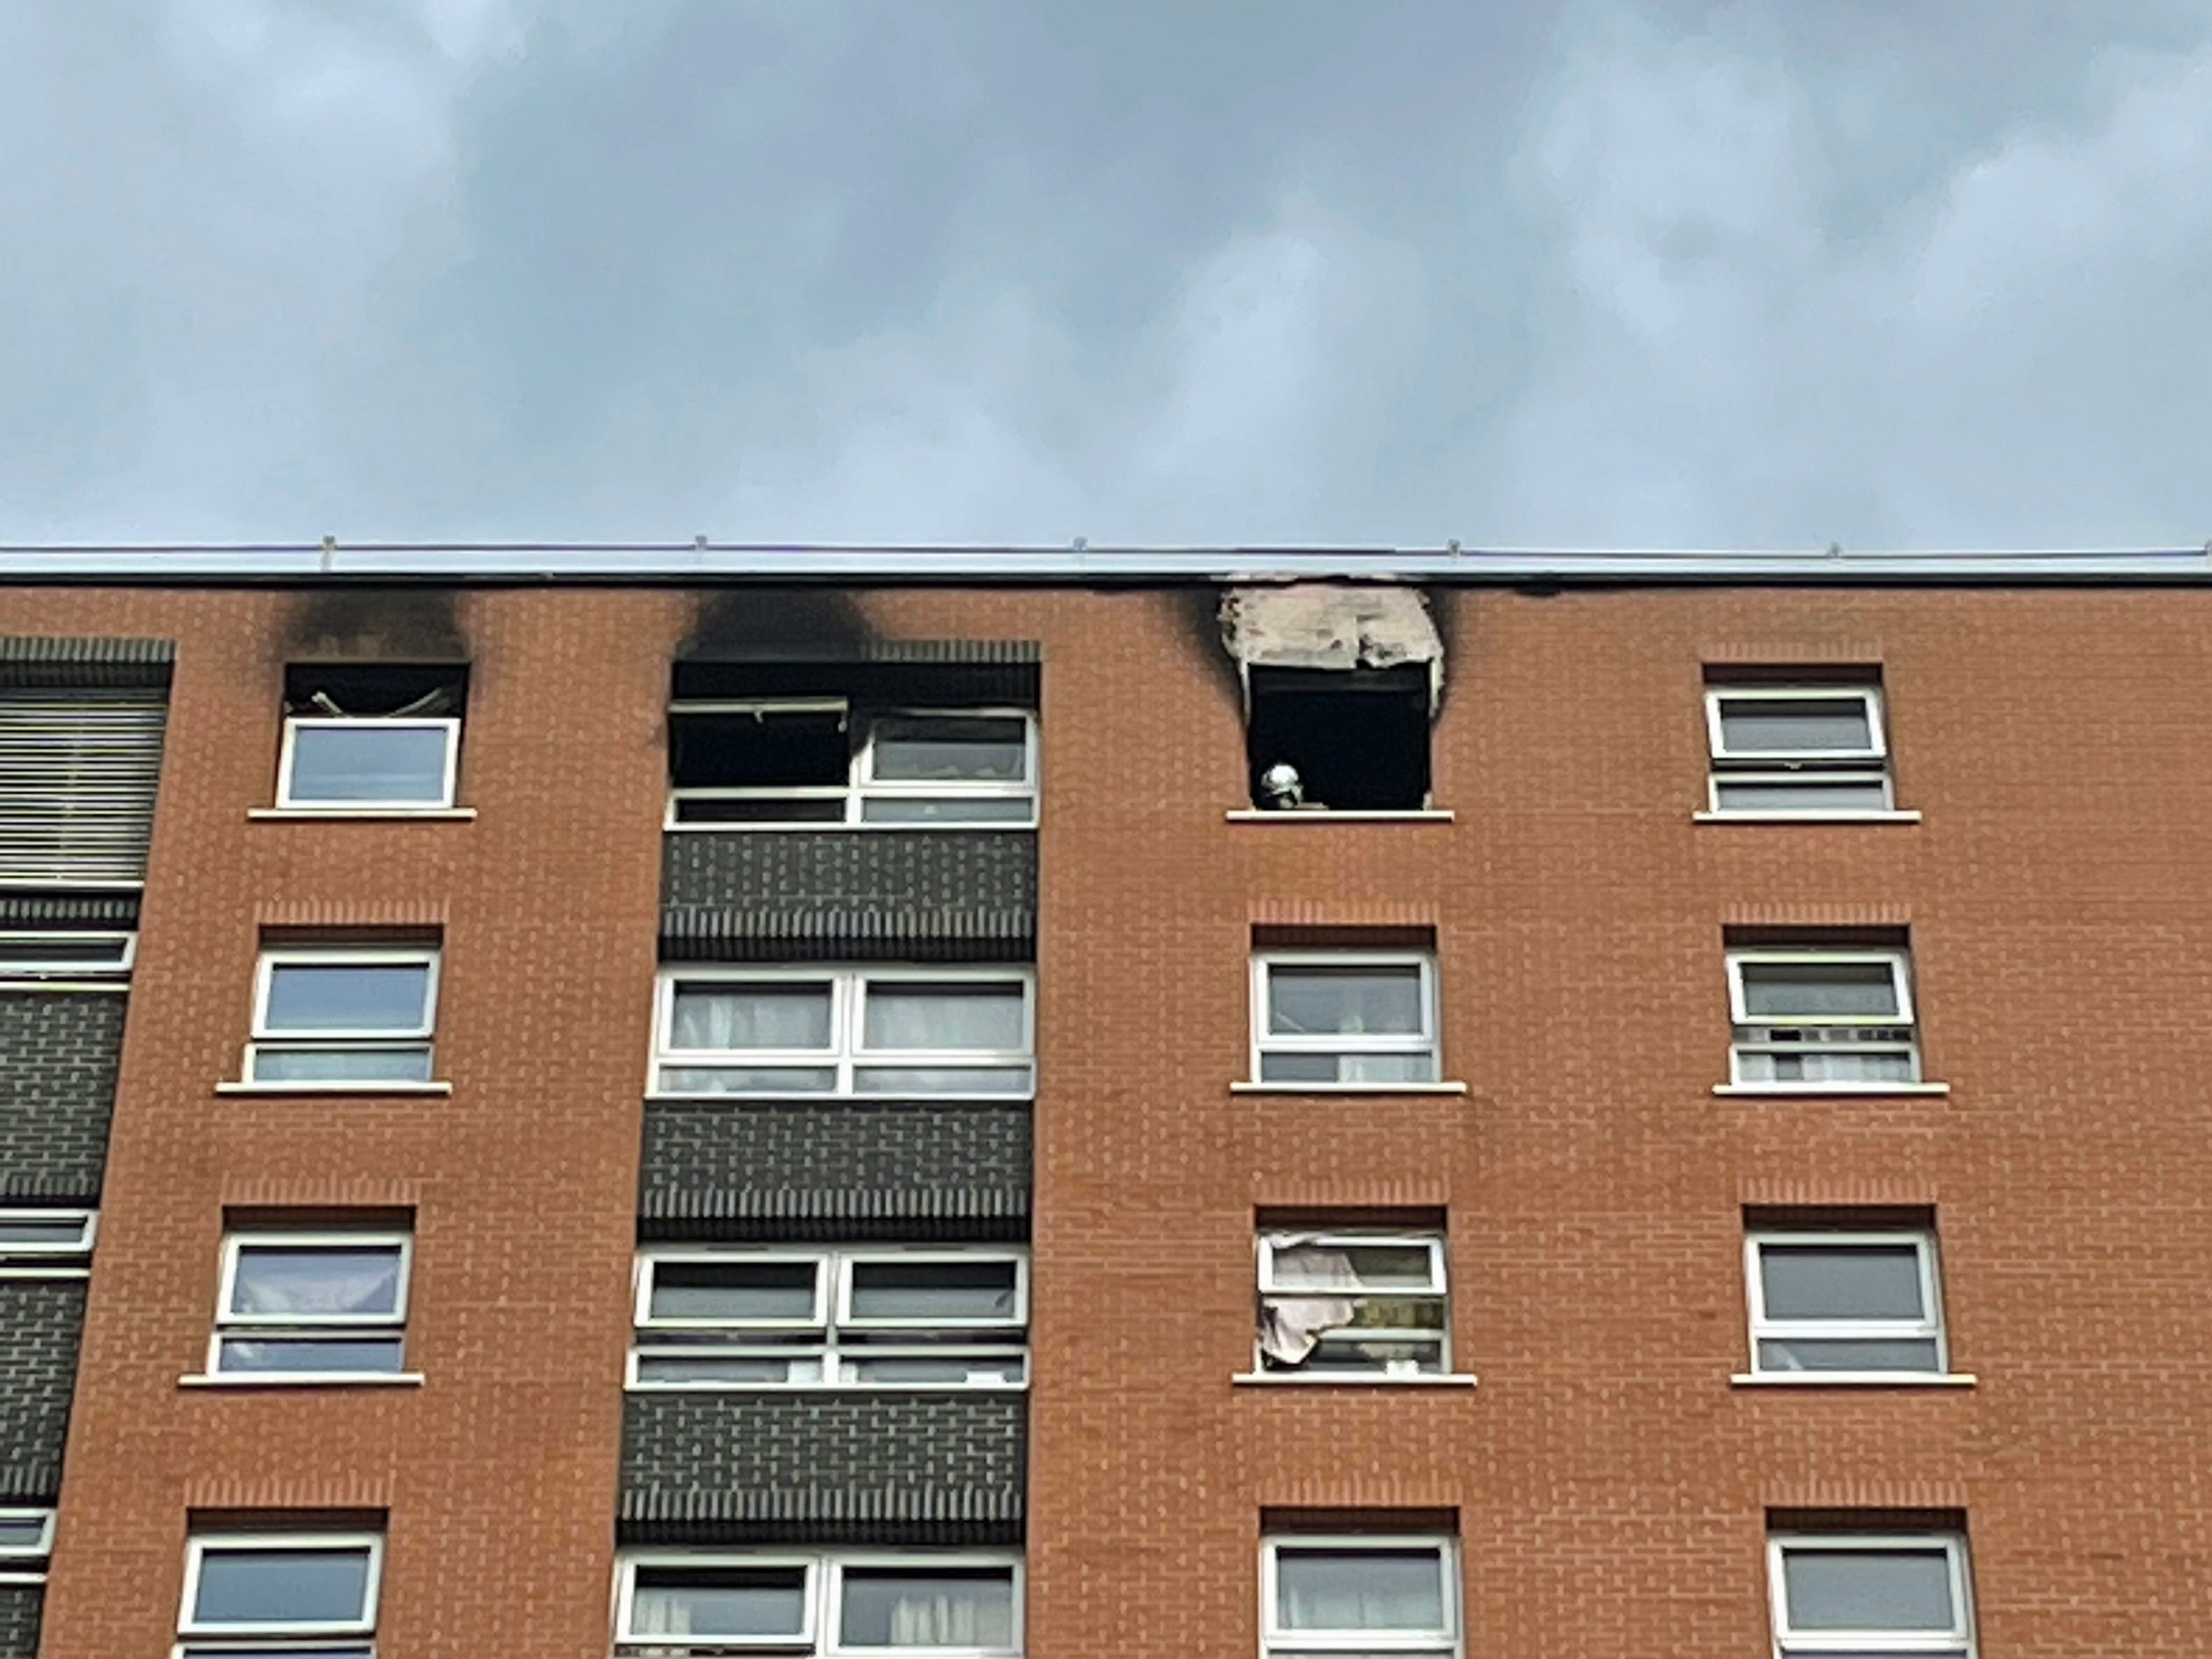 Eight people were hospitalised after the fire in Easton, Bristol